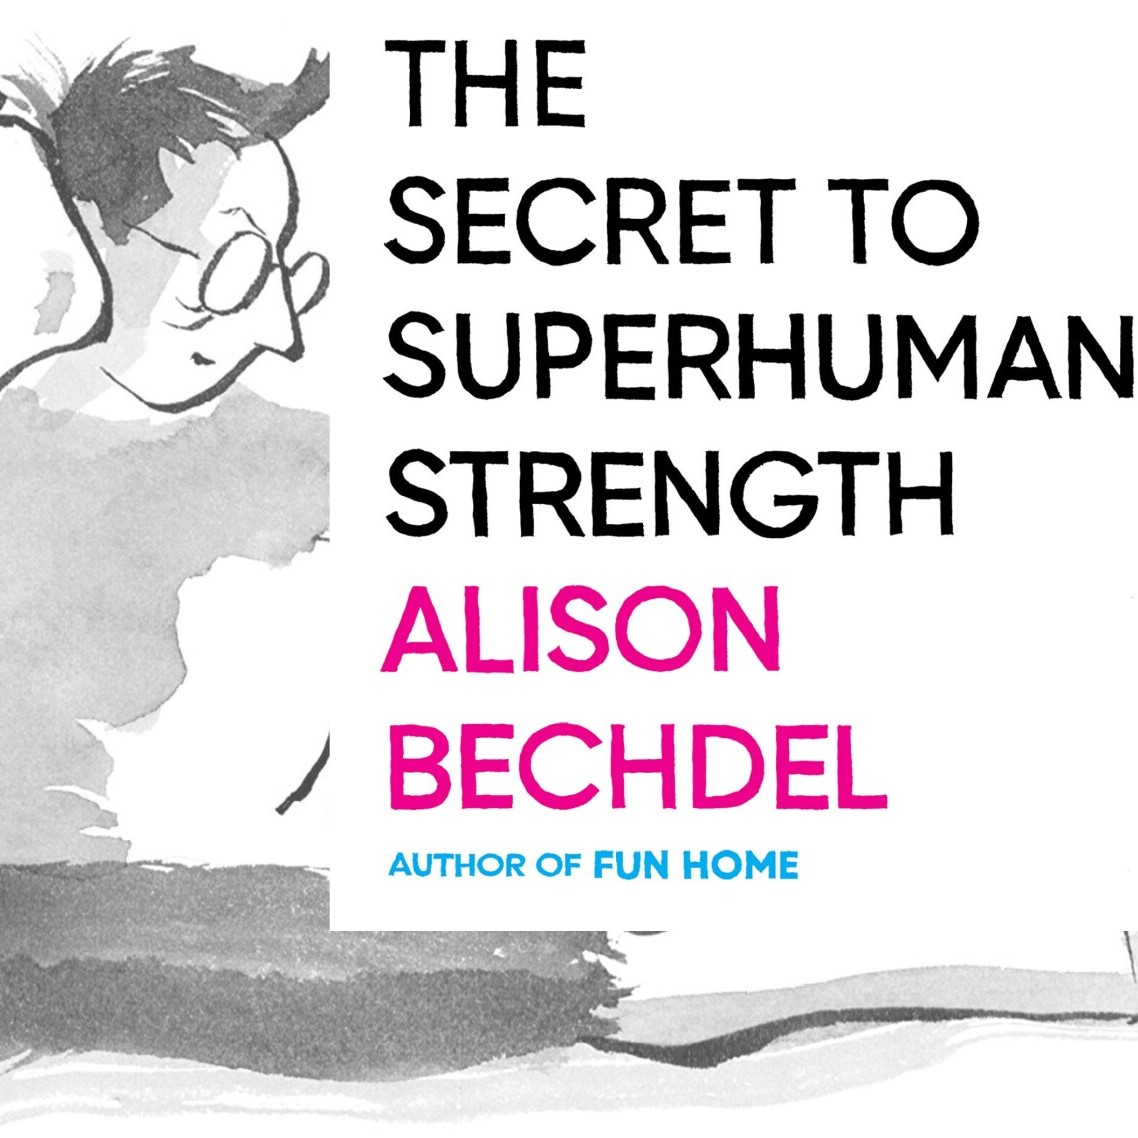 #1741: Alison Bechdel's "The Secret to Superhuman Strength" | The Book Show